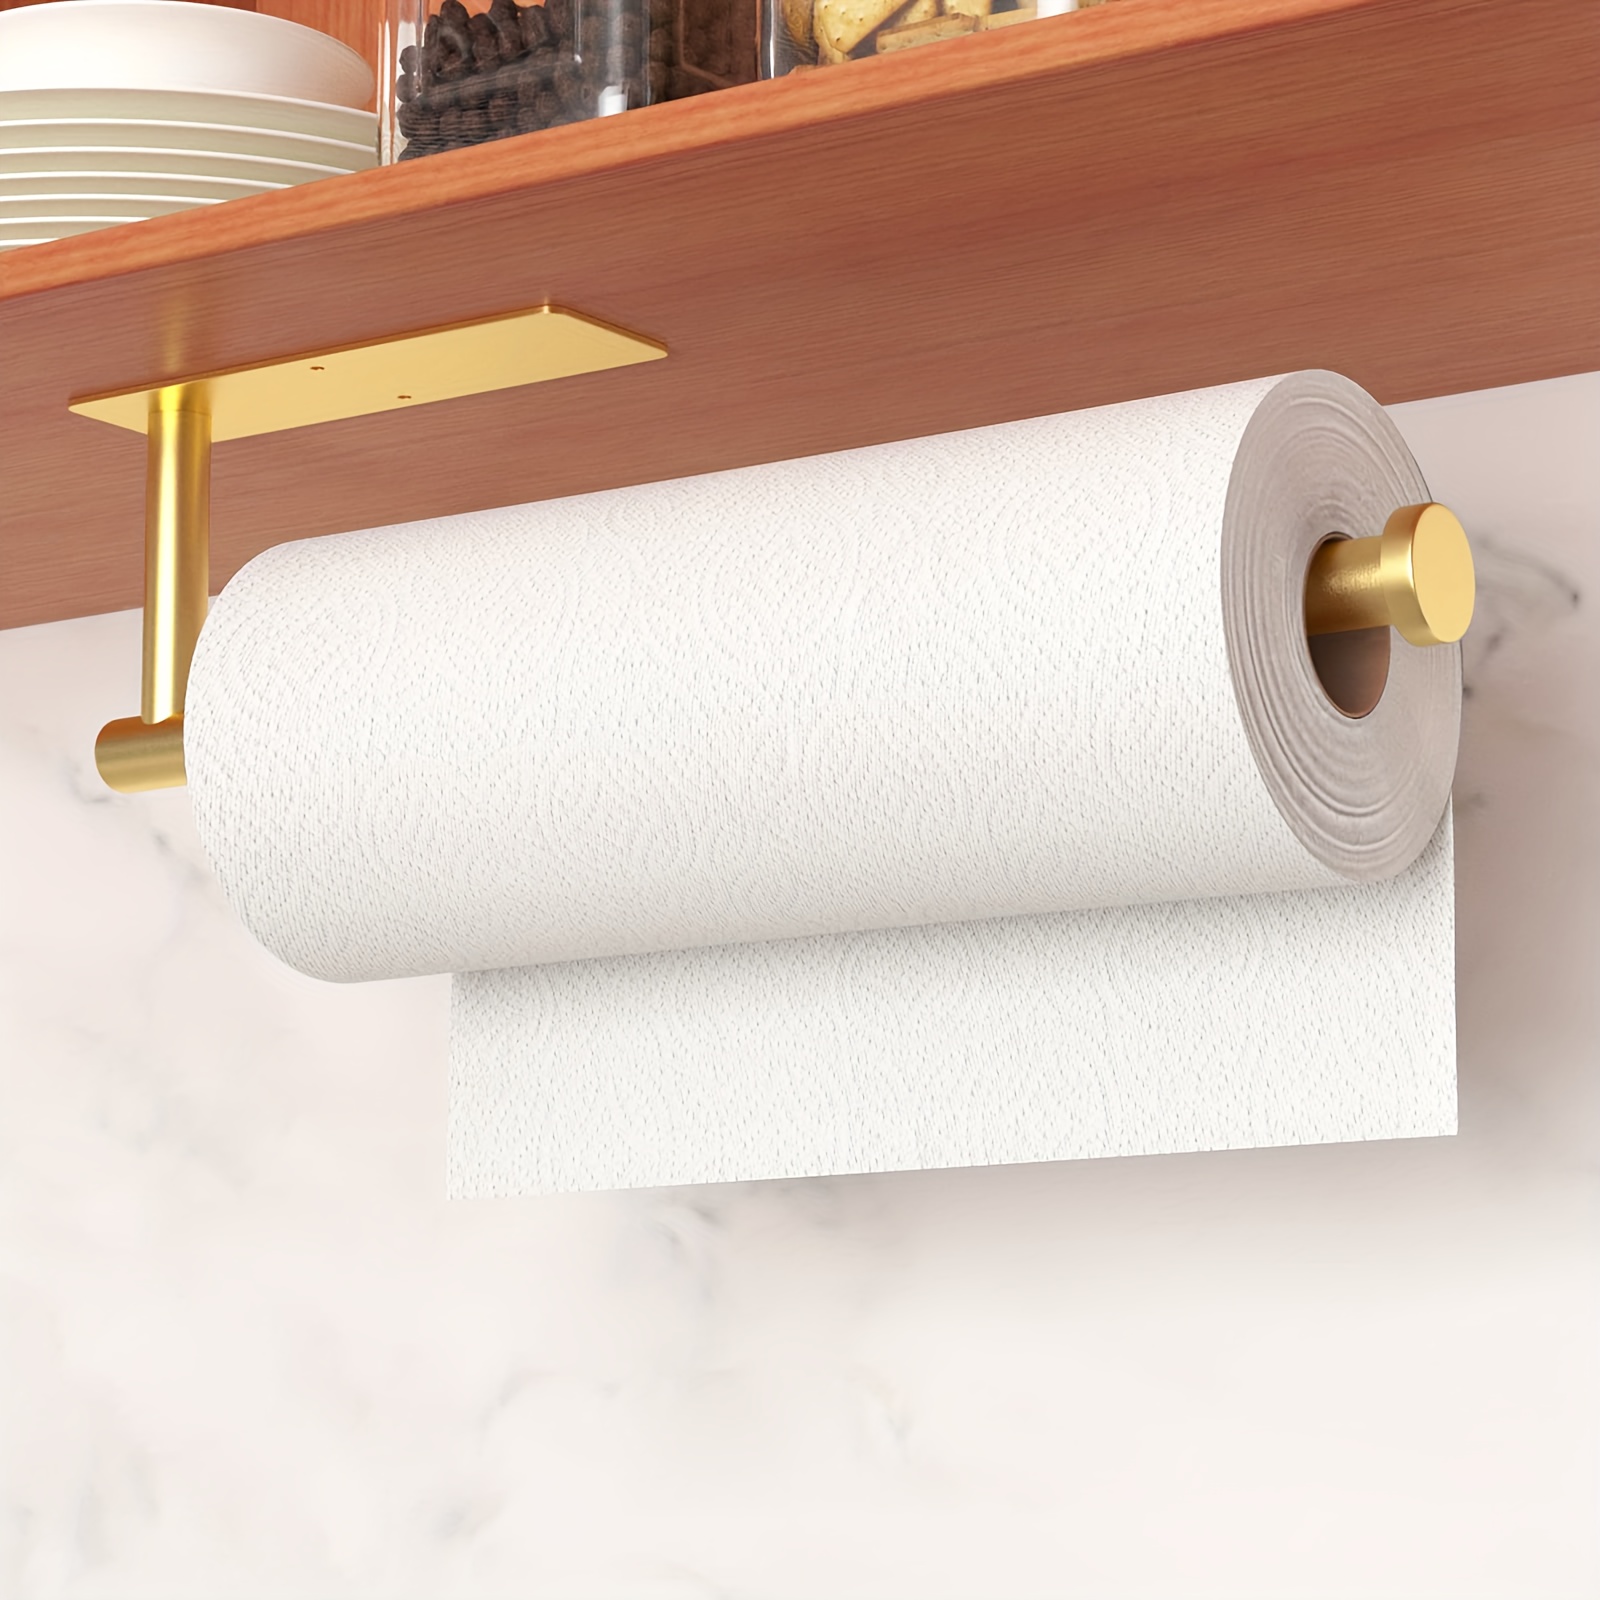 1pc Punch-Free Kitchen Paper Towel Holder Self-Adhesive Wall Mount